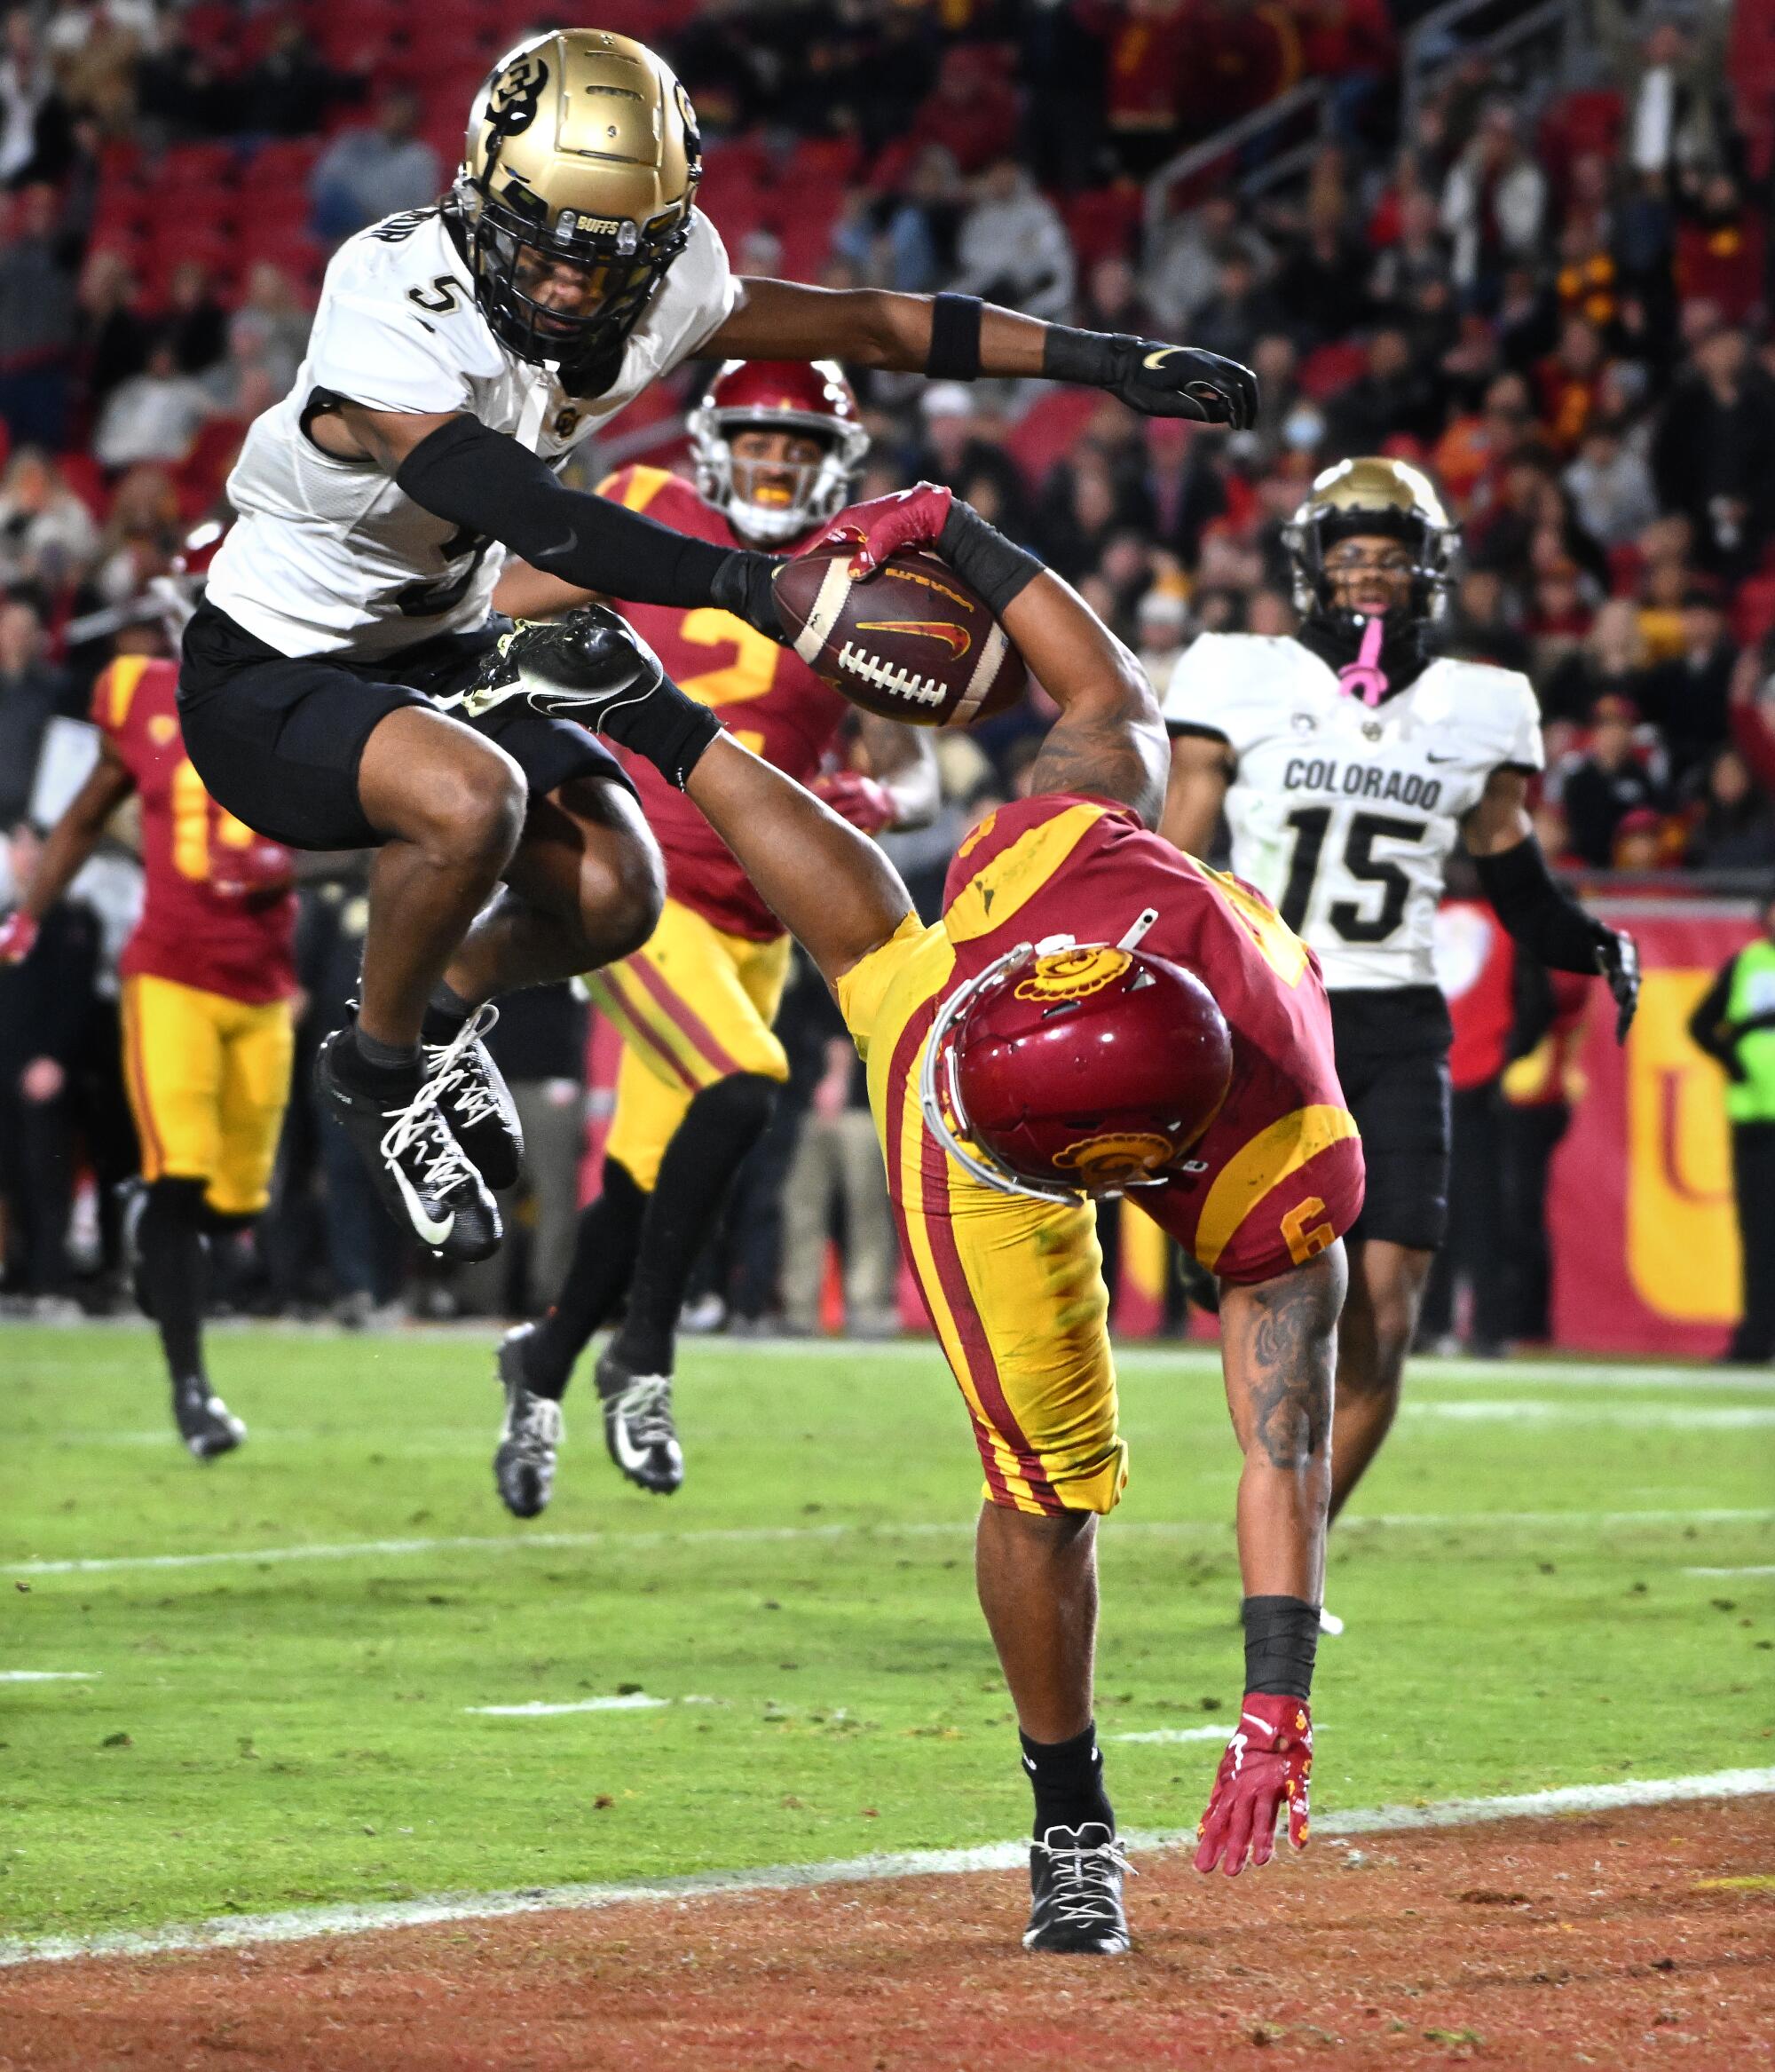 USC running back Austin Jones leaps into the end zone for a touchdown in front of Colorado safety Tyrin Taylor.